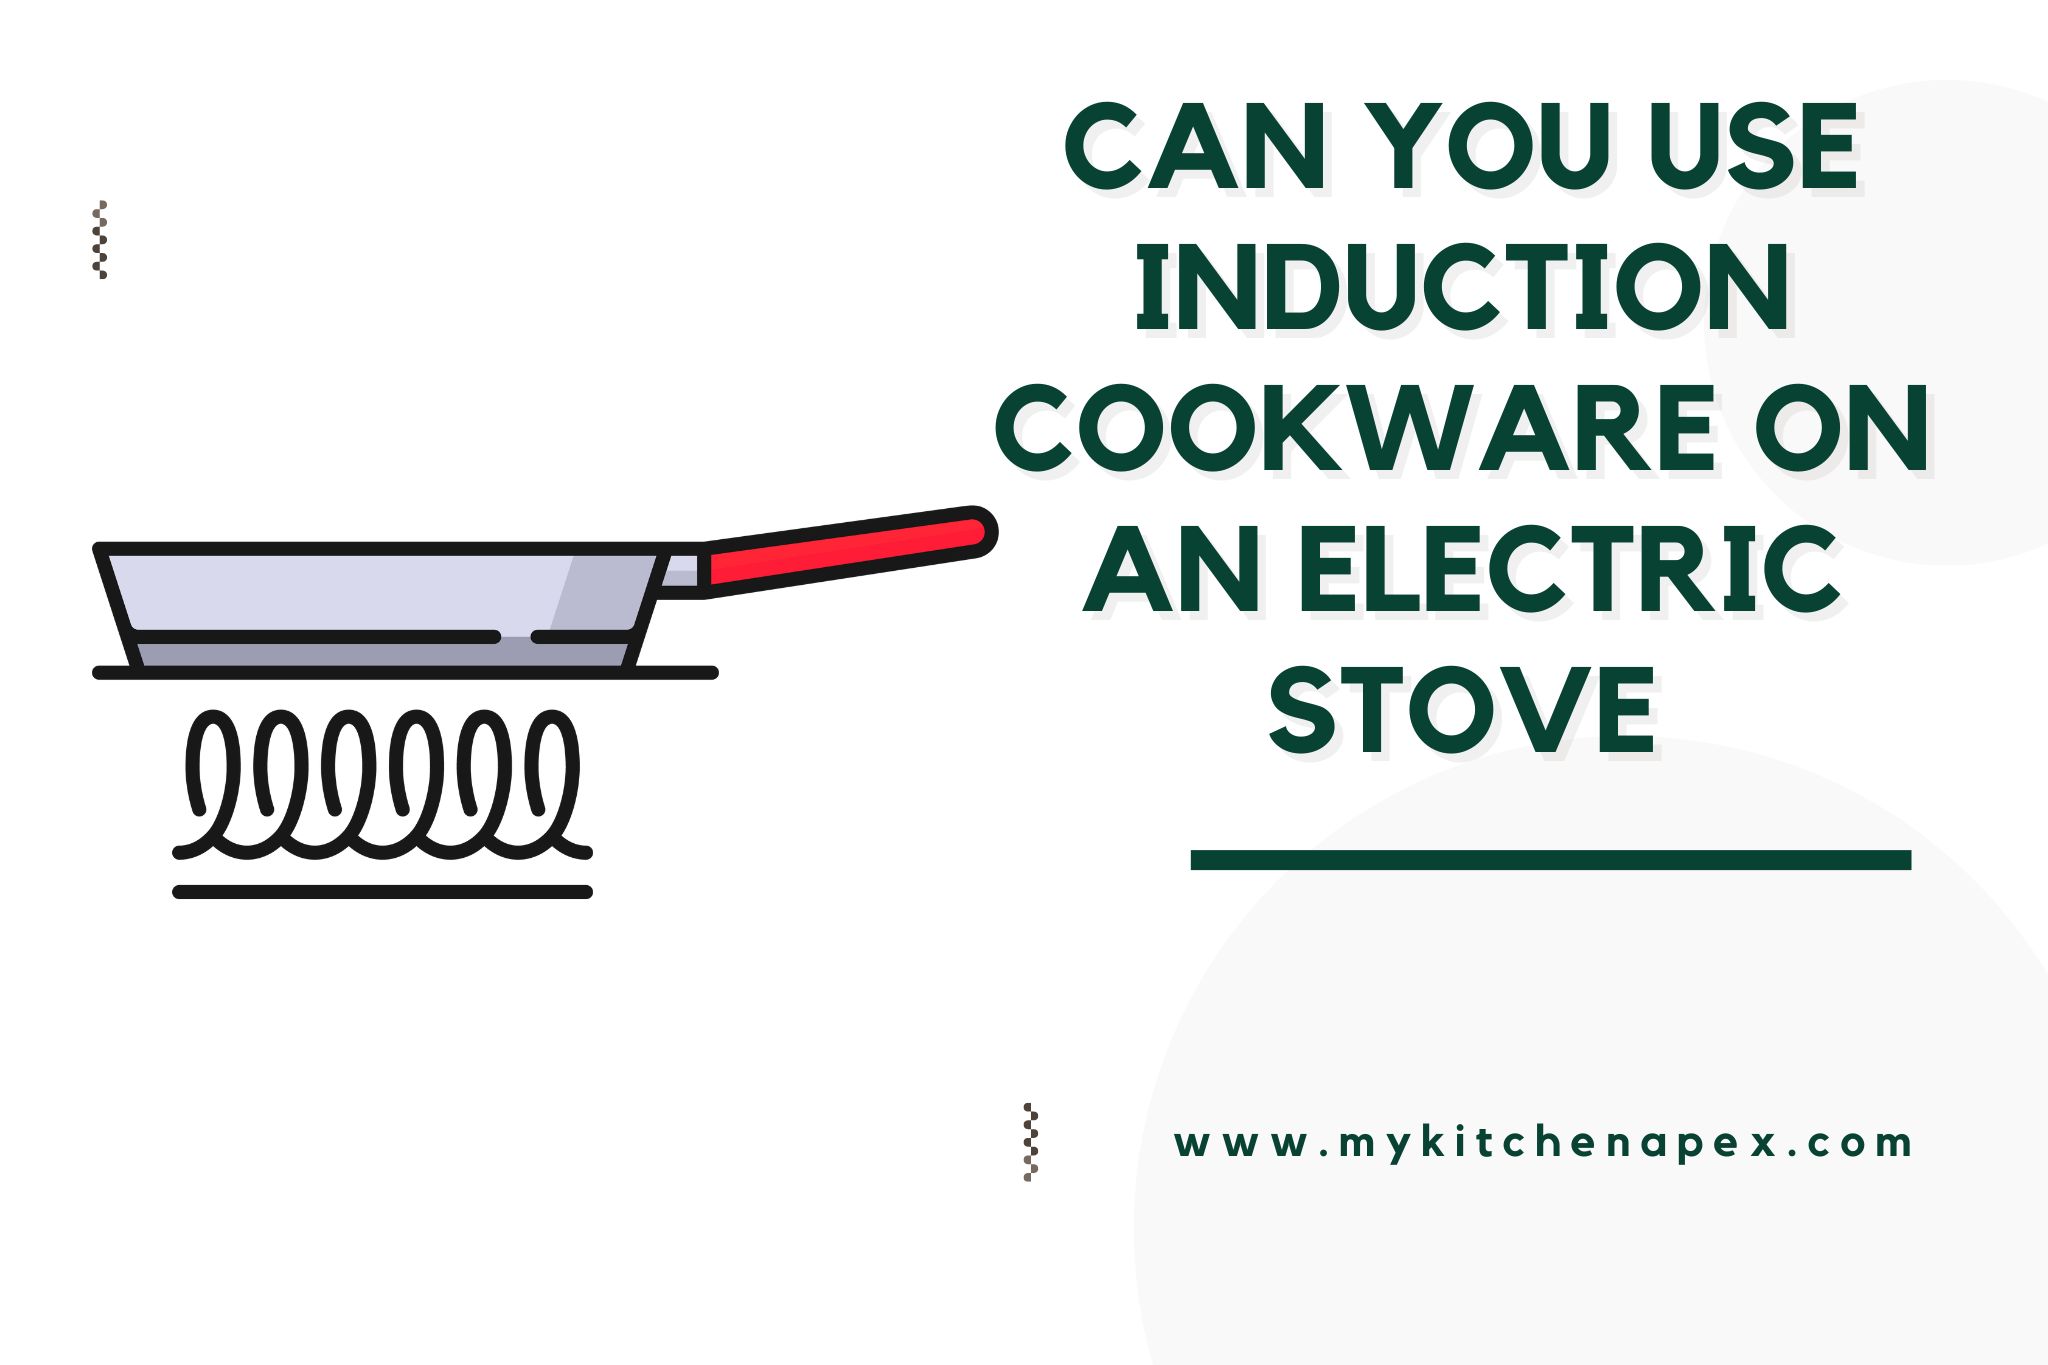 can you use induction cookware on an electric stove